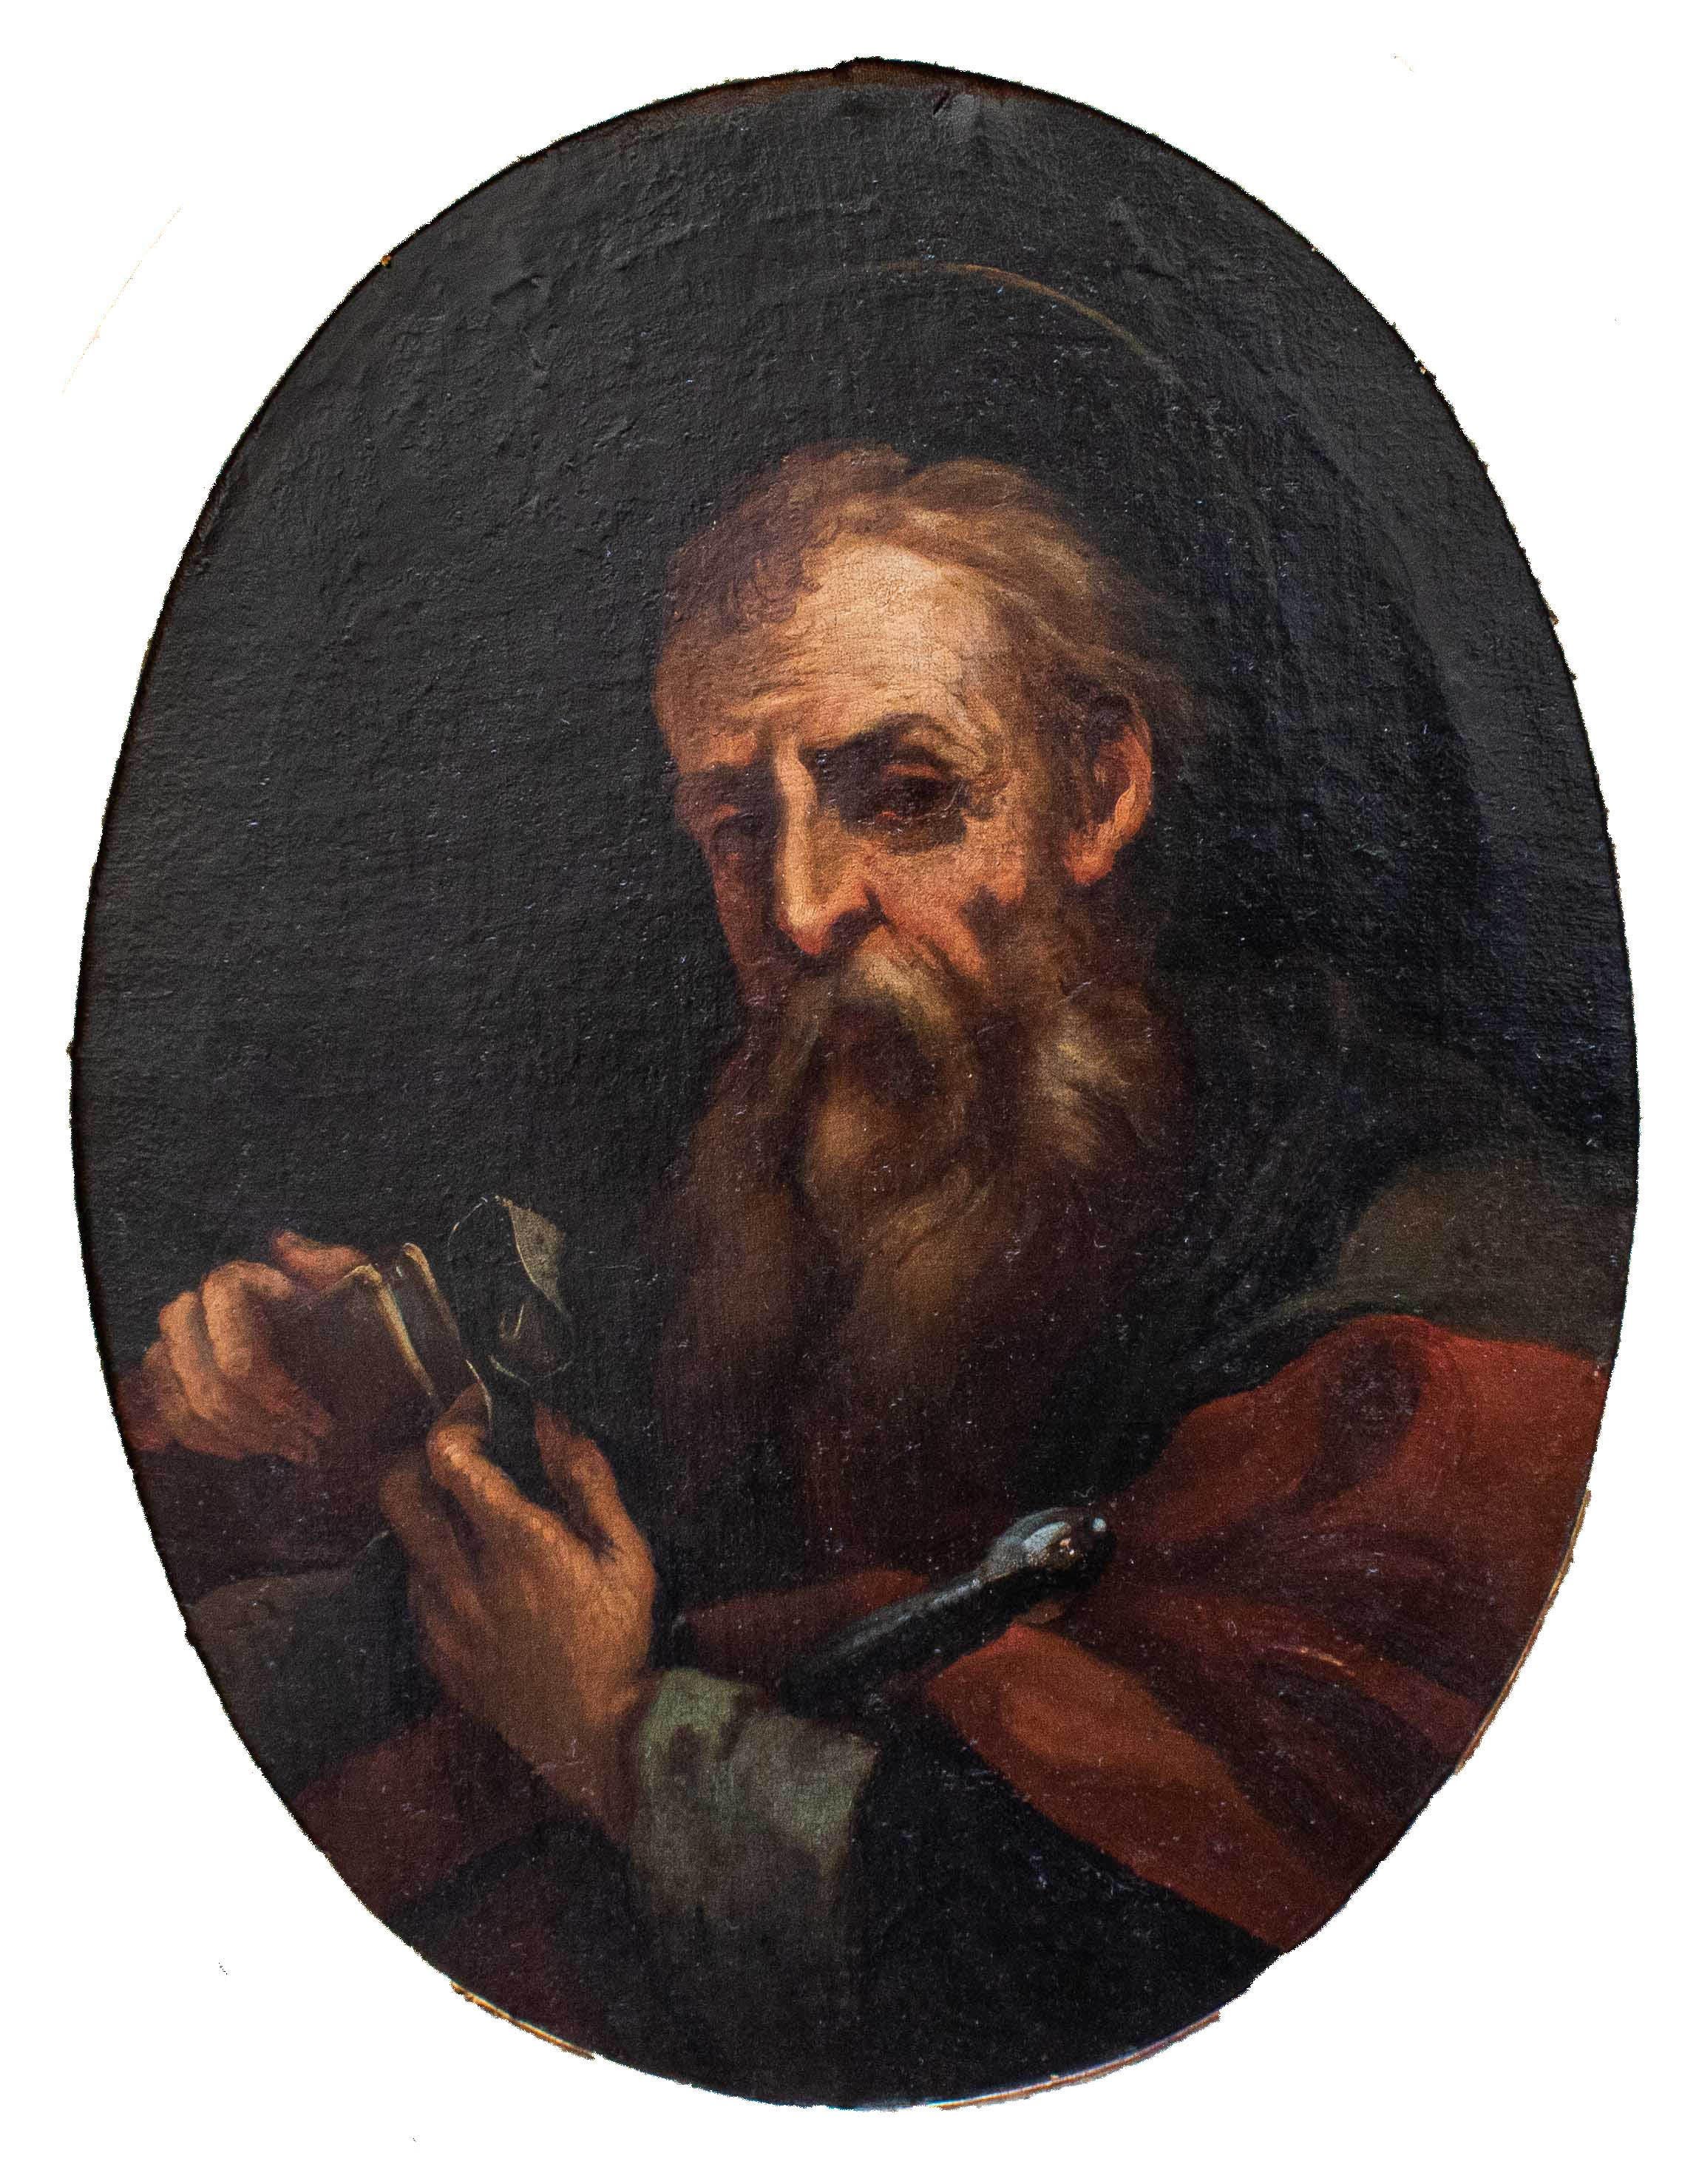 17th century

Portrait of Saint Paul

Measures: Oil on oval canvas, 67 x 50 cm - with frame 81 x 64 cm

The portrait examined here depicts the Apostle Paul, or Paul of Tarsus, sent as a missionary of the Gospel between the Greeks and the pagan